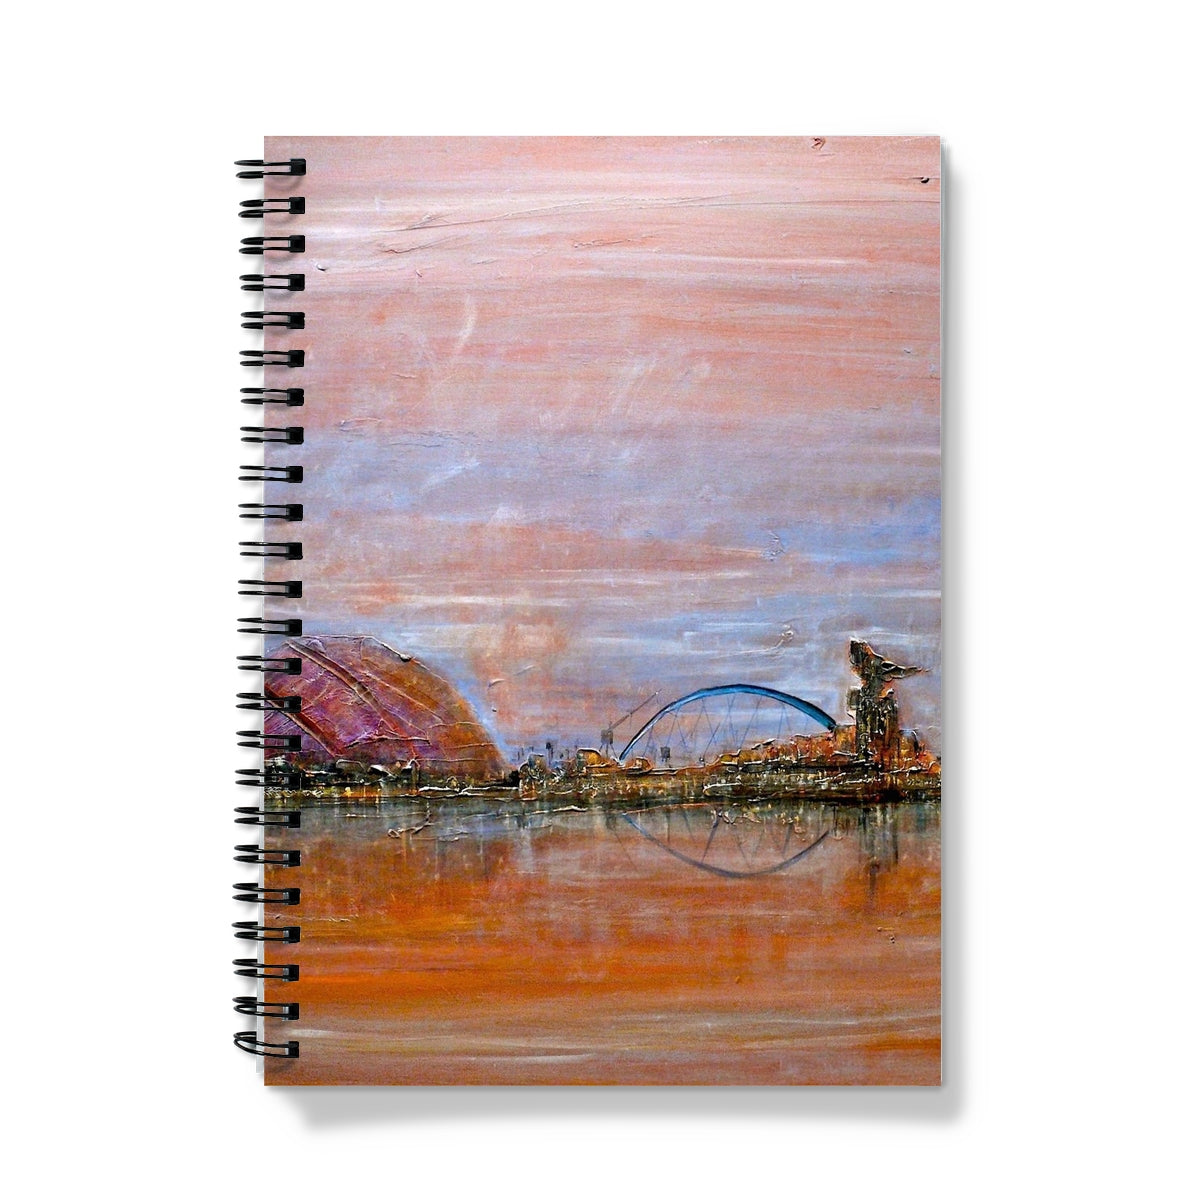 Glasgow Harbour Art Gifts Notebook-Journals & Notebooks-Edinburgh & Glasgow Art Gallery-A5-Lined-Paintings, Prints, Homeware, Art Gifts From Scotland By Scottish Artist Kevin Hunter